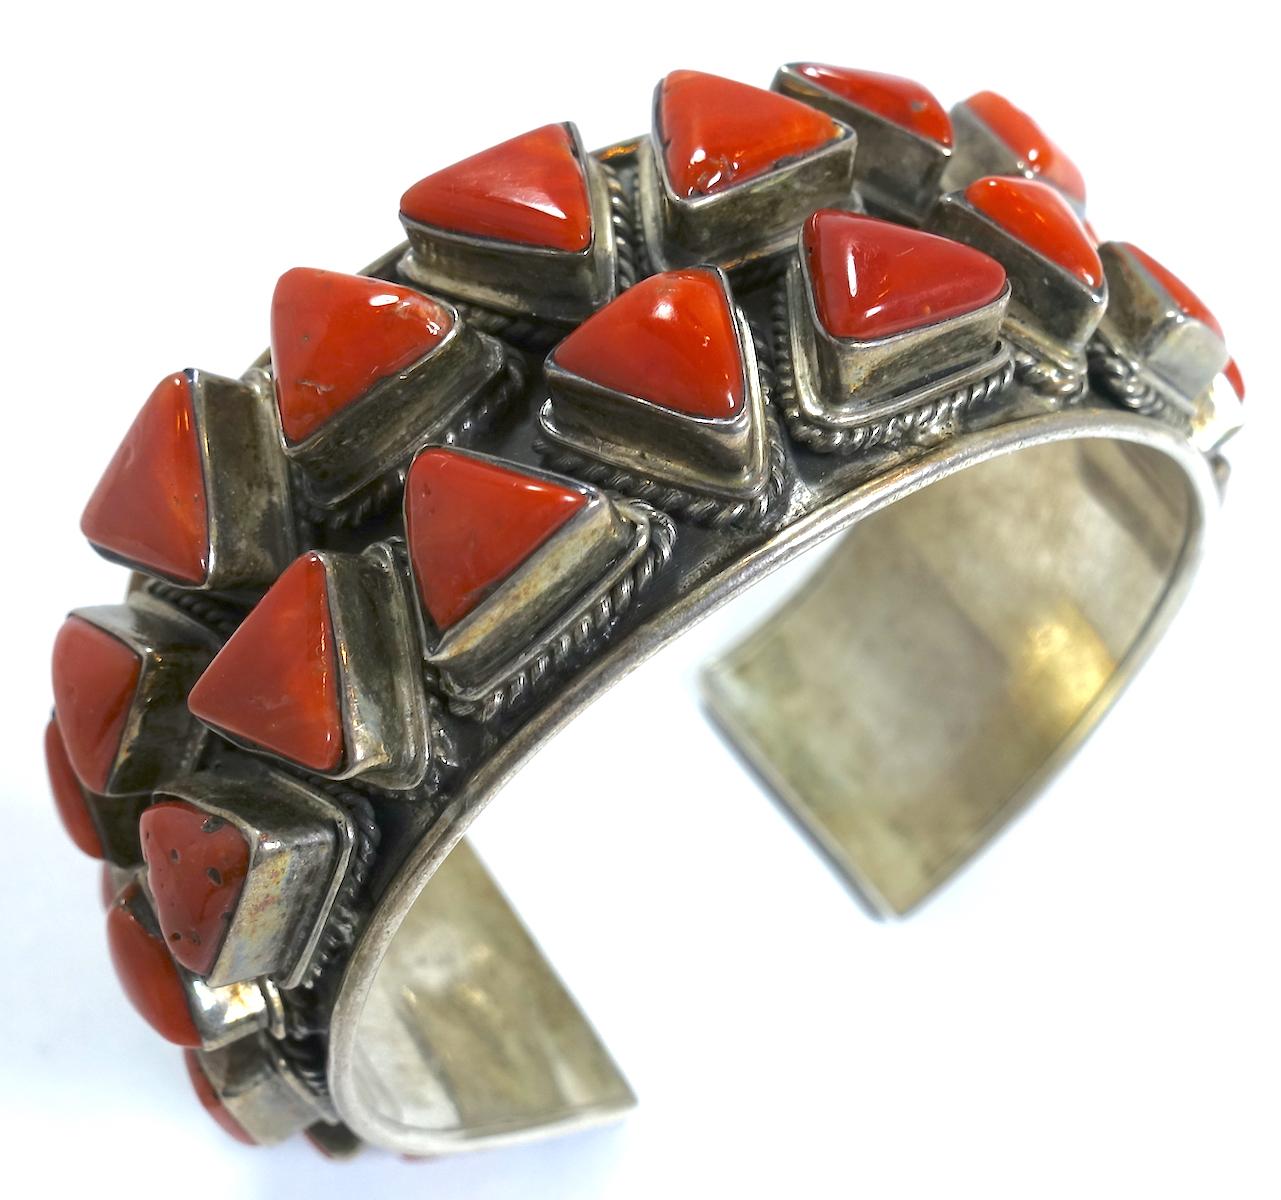 This is a superb example of early Zuni American Indian vintage Pawn cuff bracelet with blood coral stones in sterling silver.  This piece measures 7” x 1-1/8” and is in excellent condition.